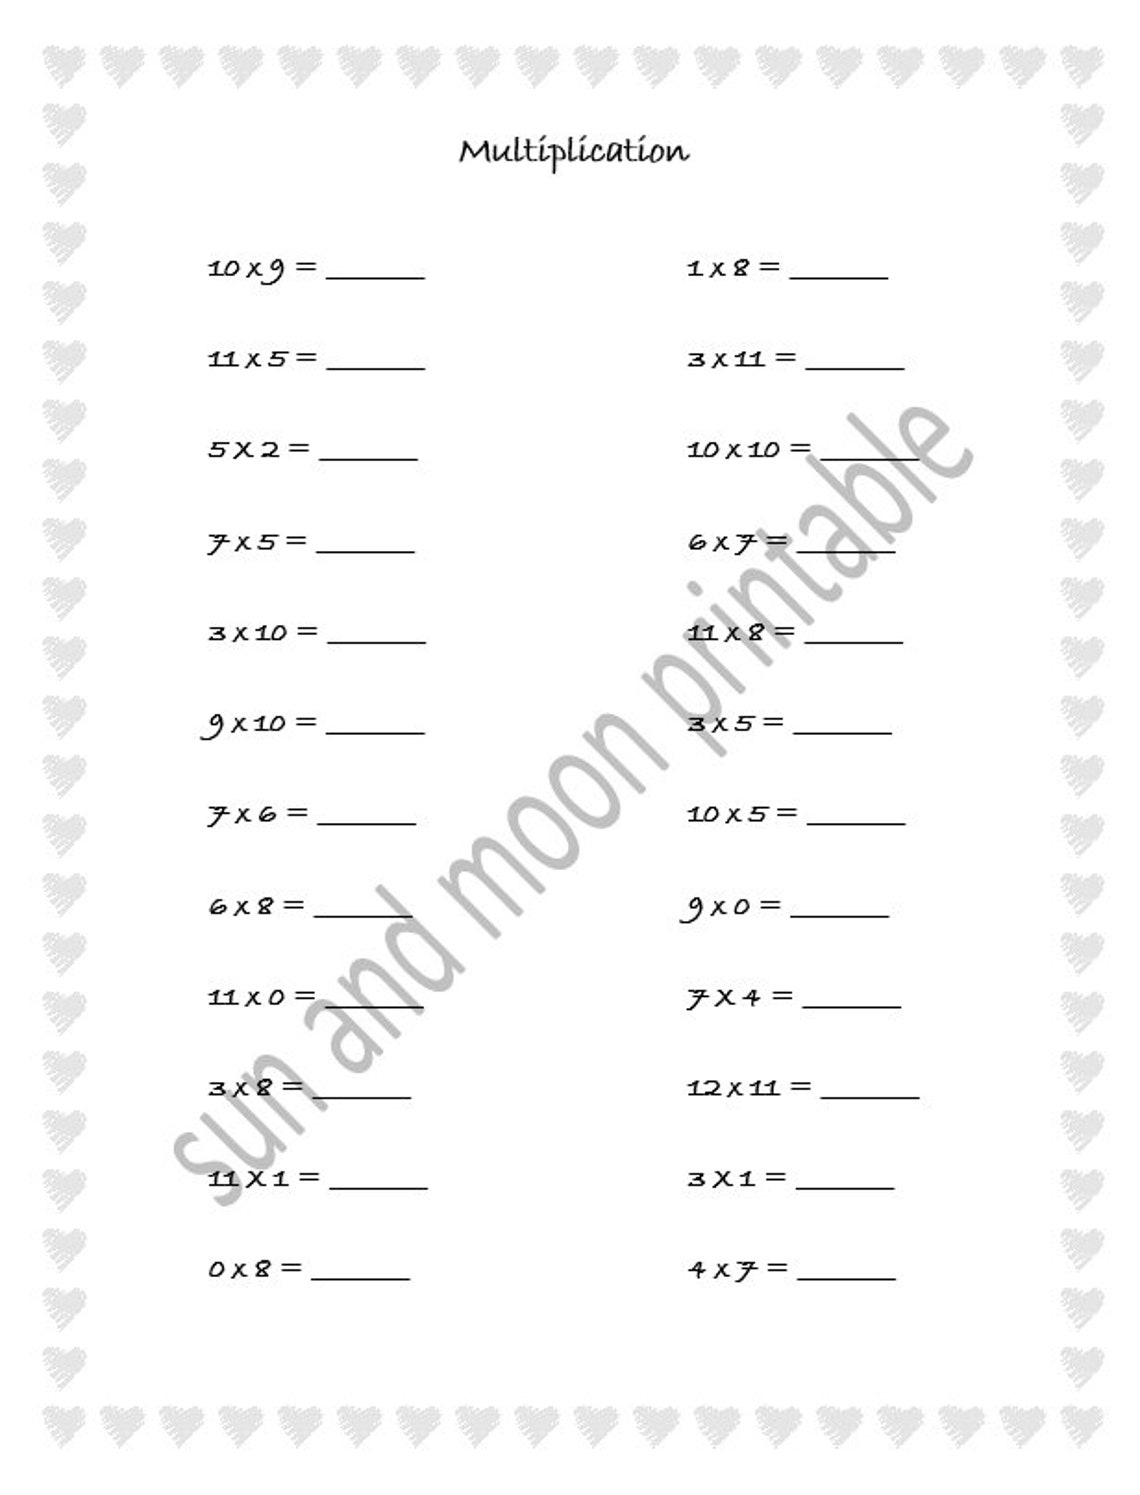 multiplication-worksheet-20-printable-pages-480-exercises-etsy